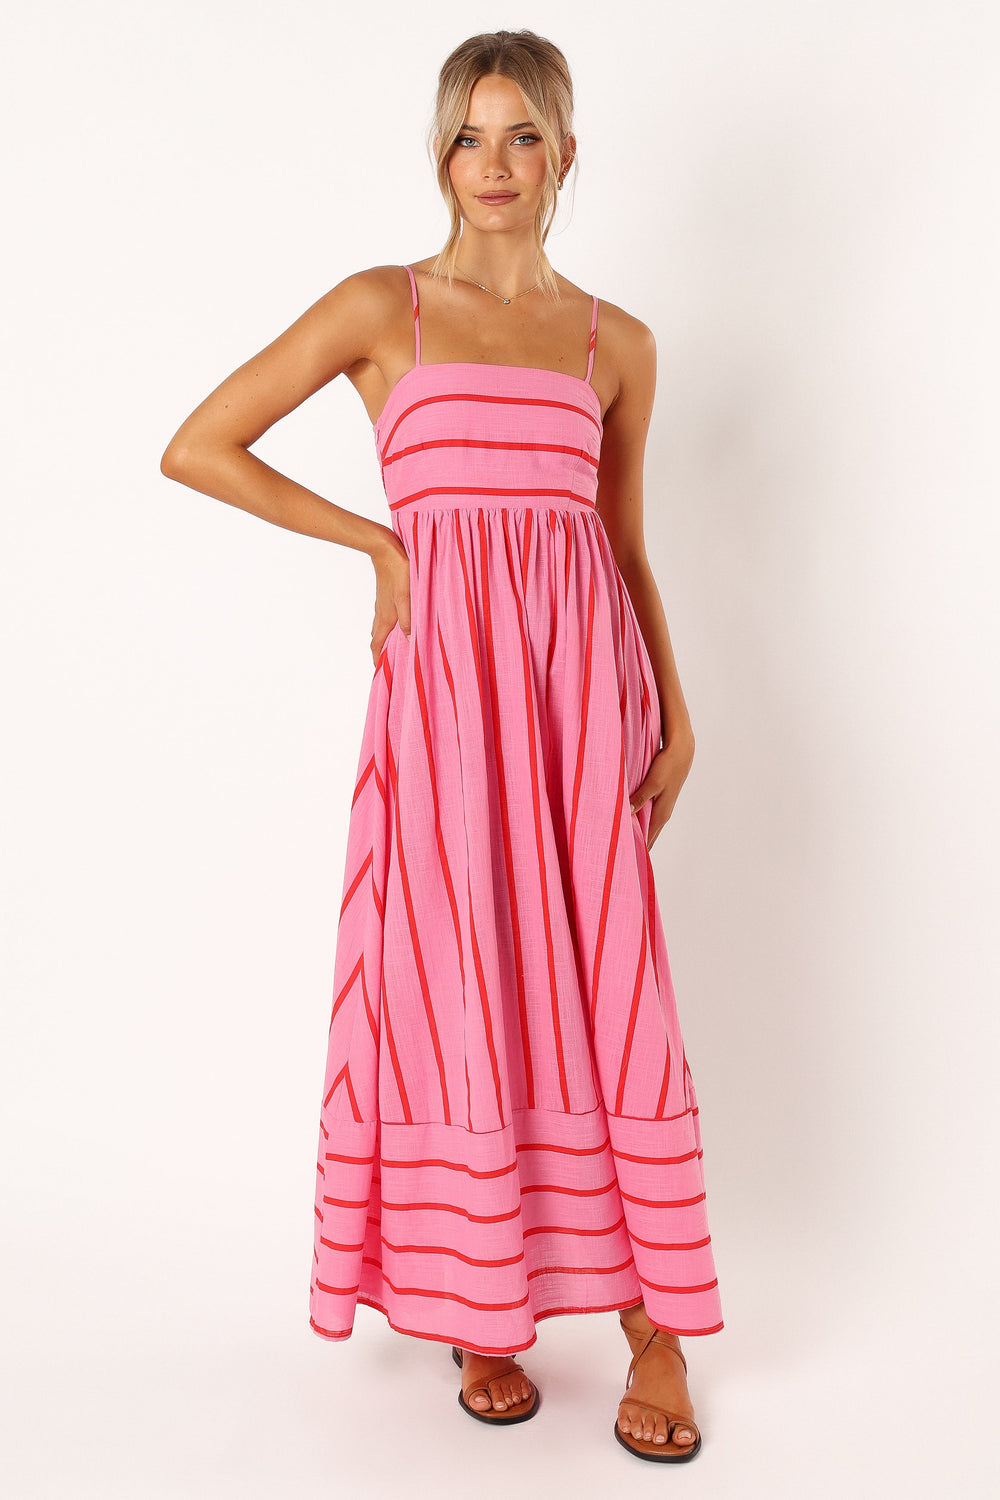 Petal and Pup USA DRESSES Pixie Maxi Dress - Pink Red